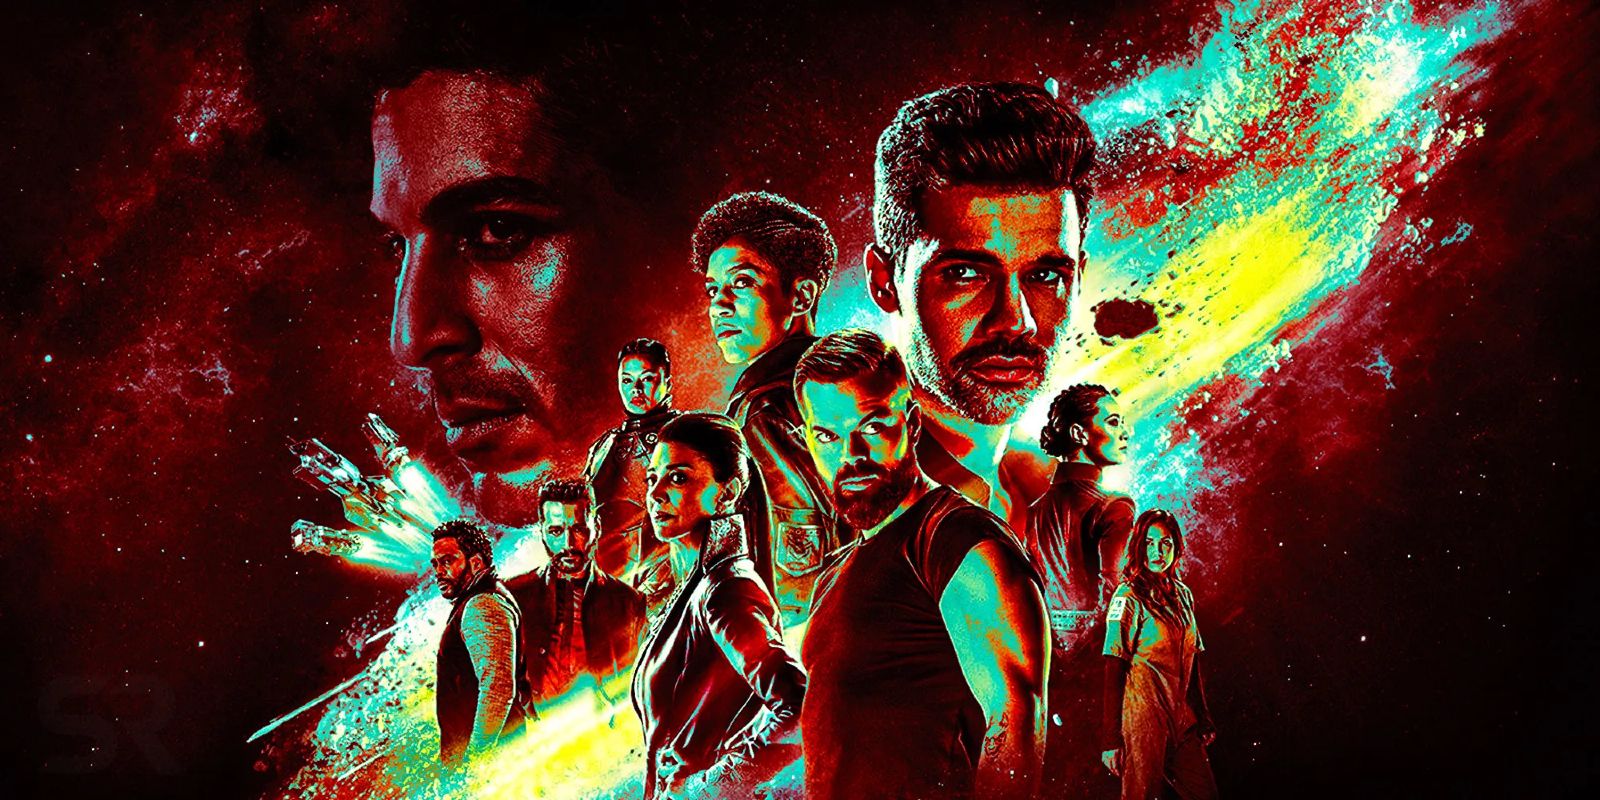 This image shows the cast of The Expanse with a red and teal overlay.